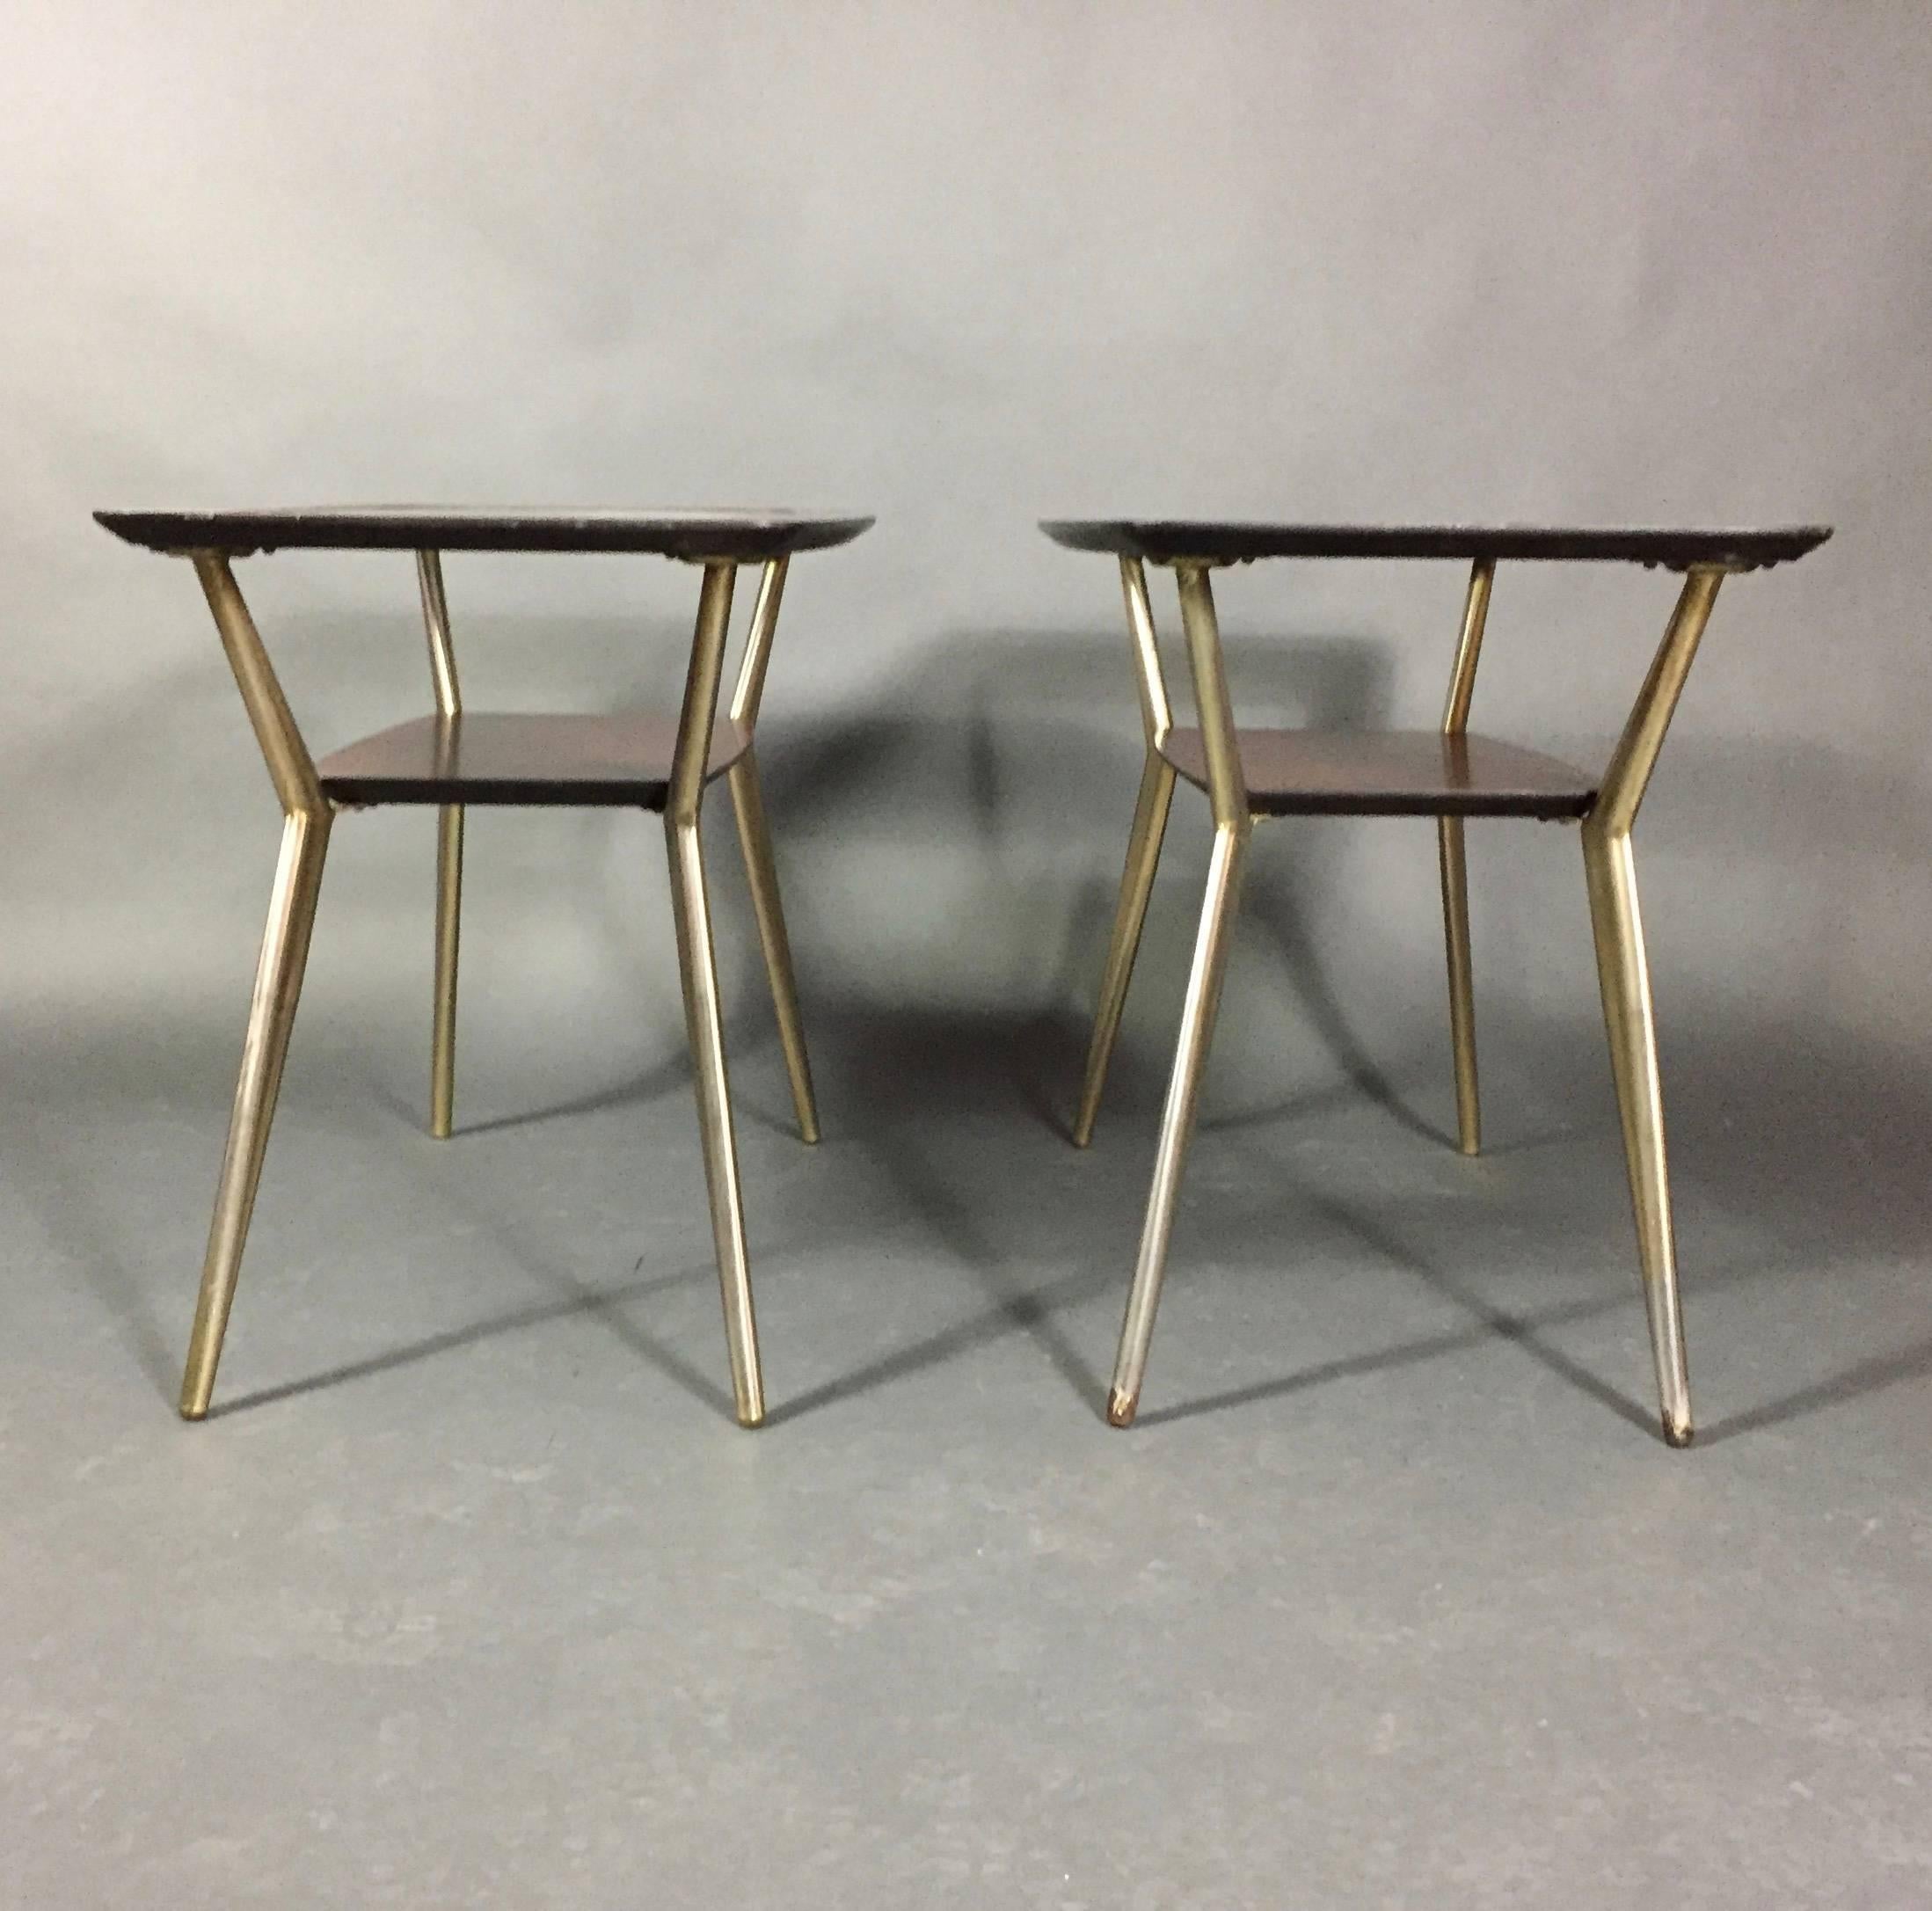 Pair of Atomic Metal and Glass Side Tables, USA, 1970 For Sale 2